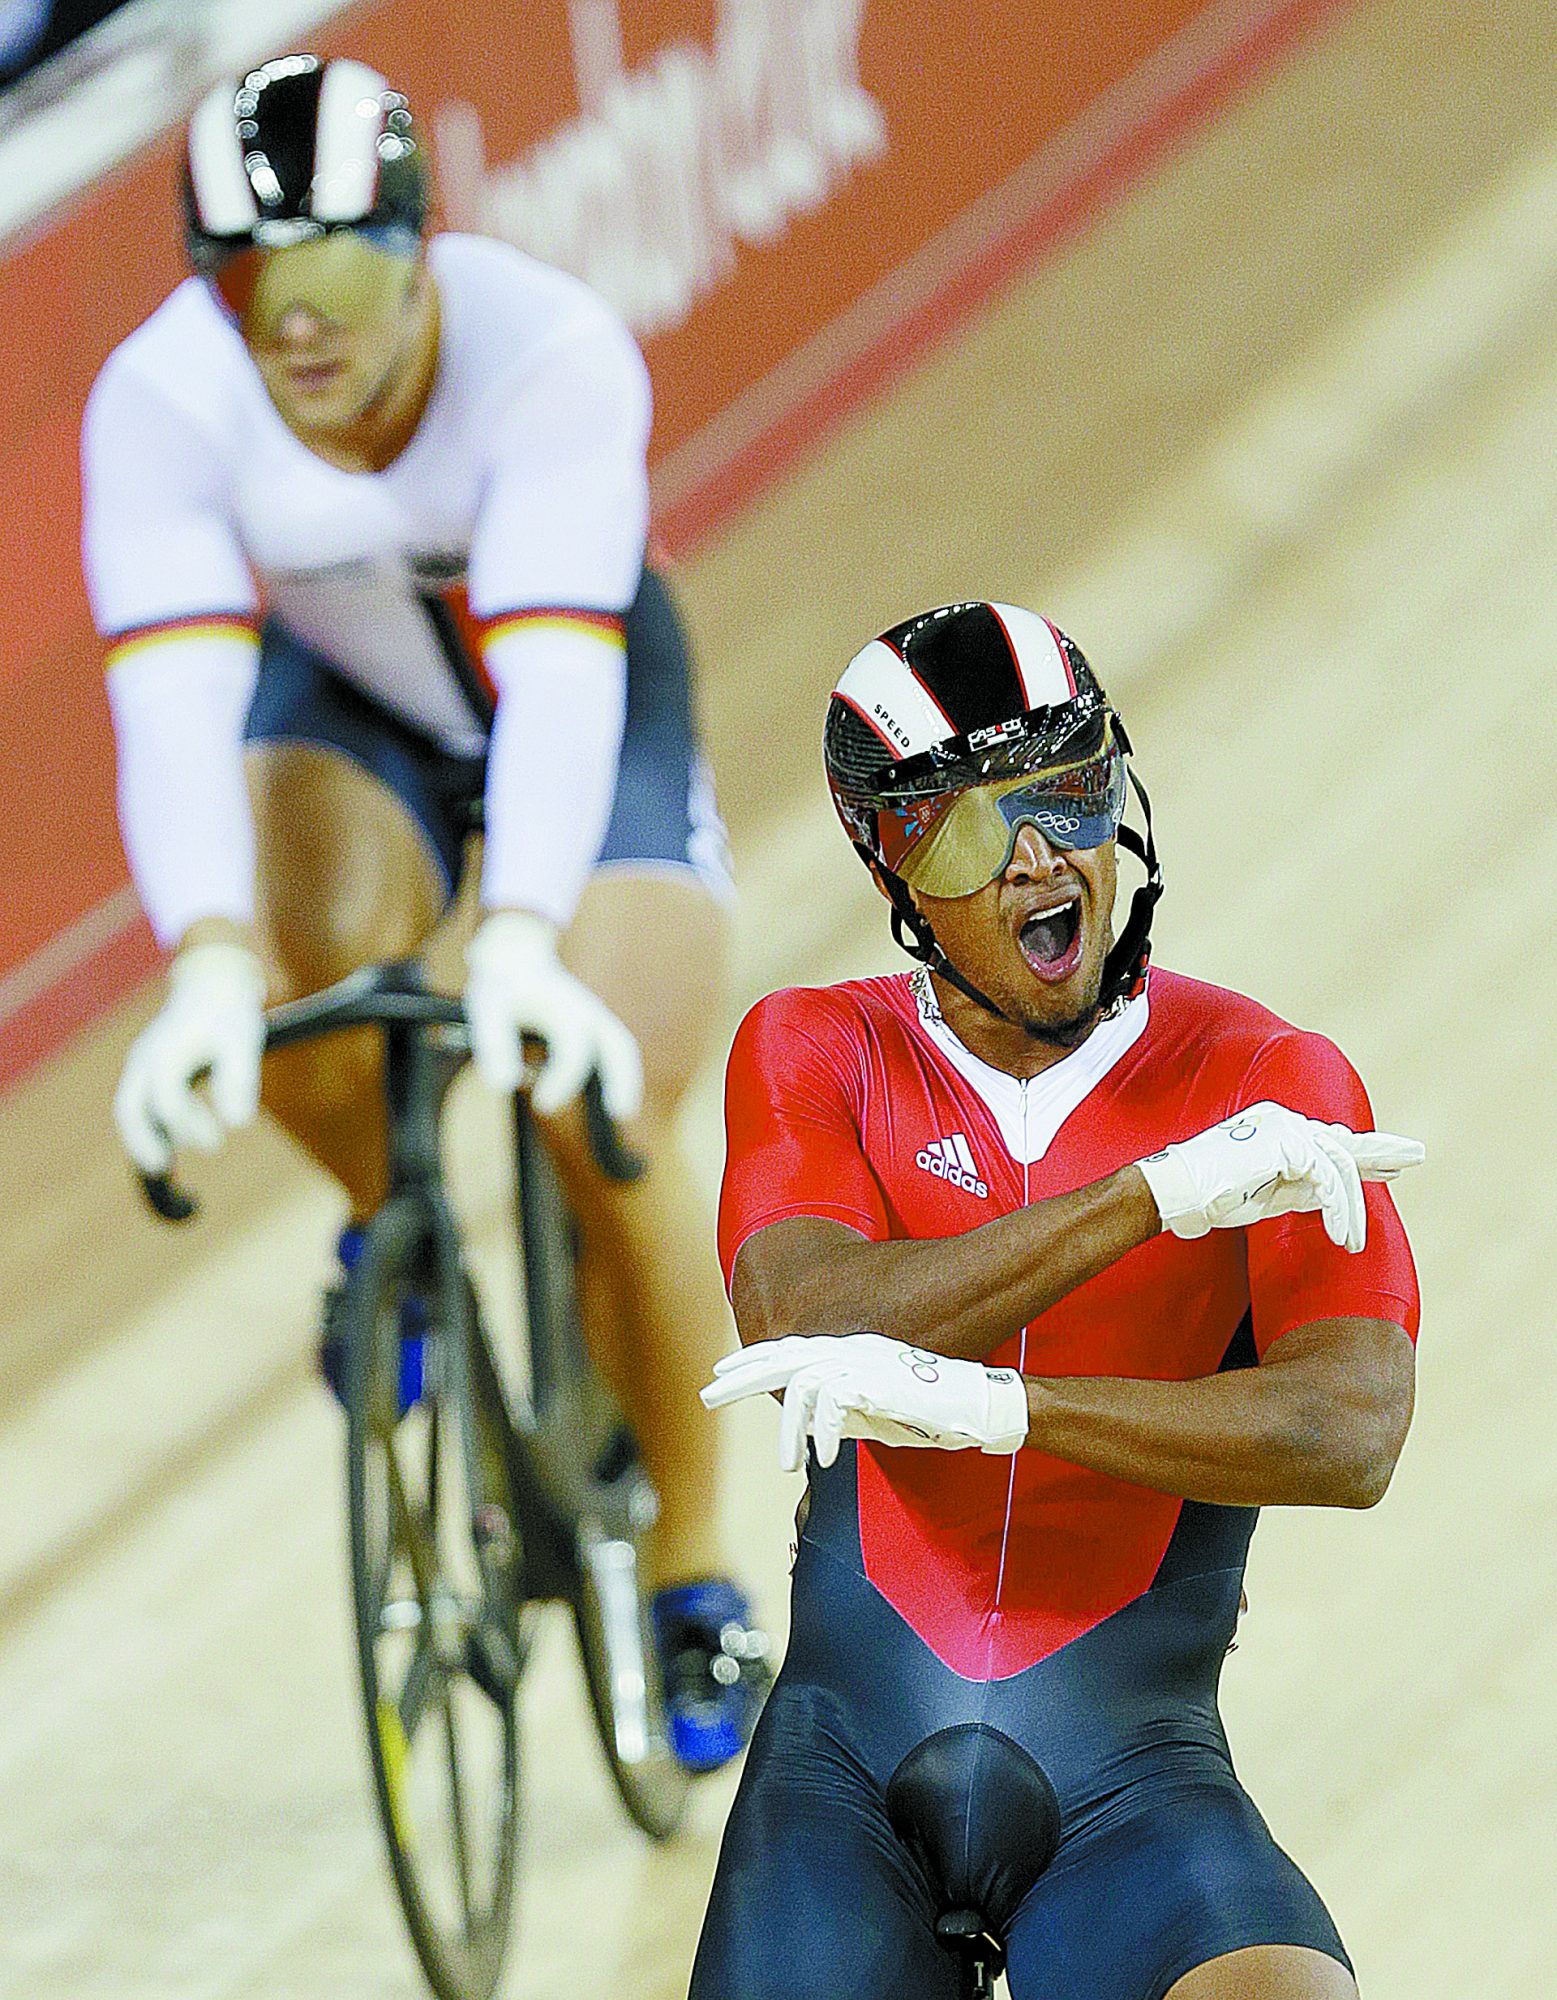 Njisane Phillip celebrates after defeating Germany’s Robert Forstemann during a men’s sprint event at the 2012 Olympics in London.